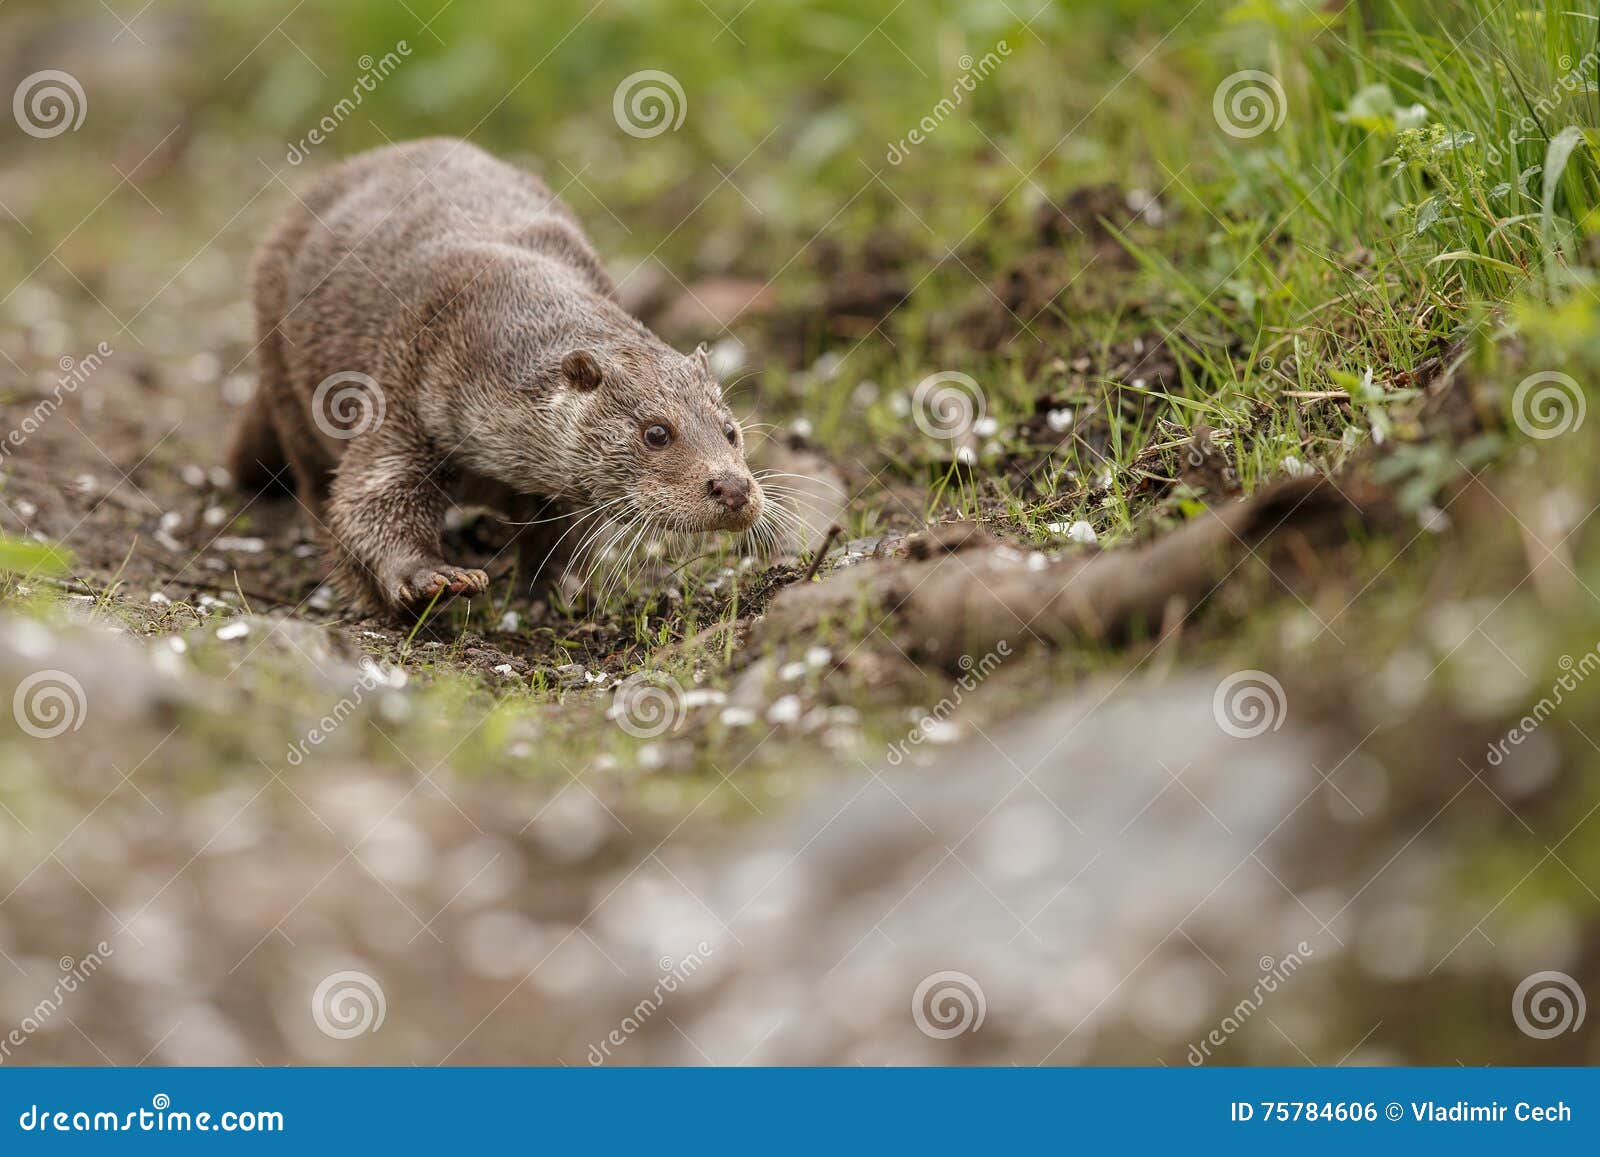 beautiful and playful river otter in the nature habitat in czech republic